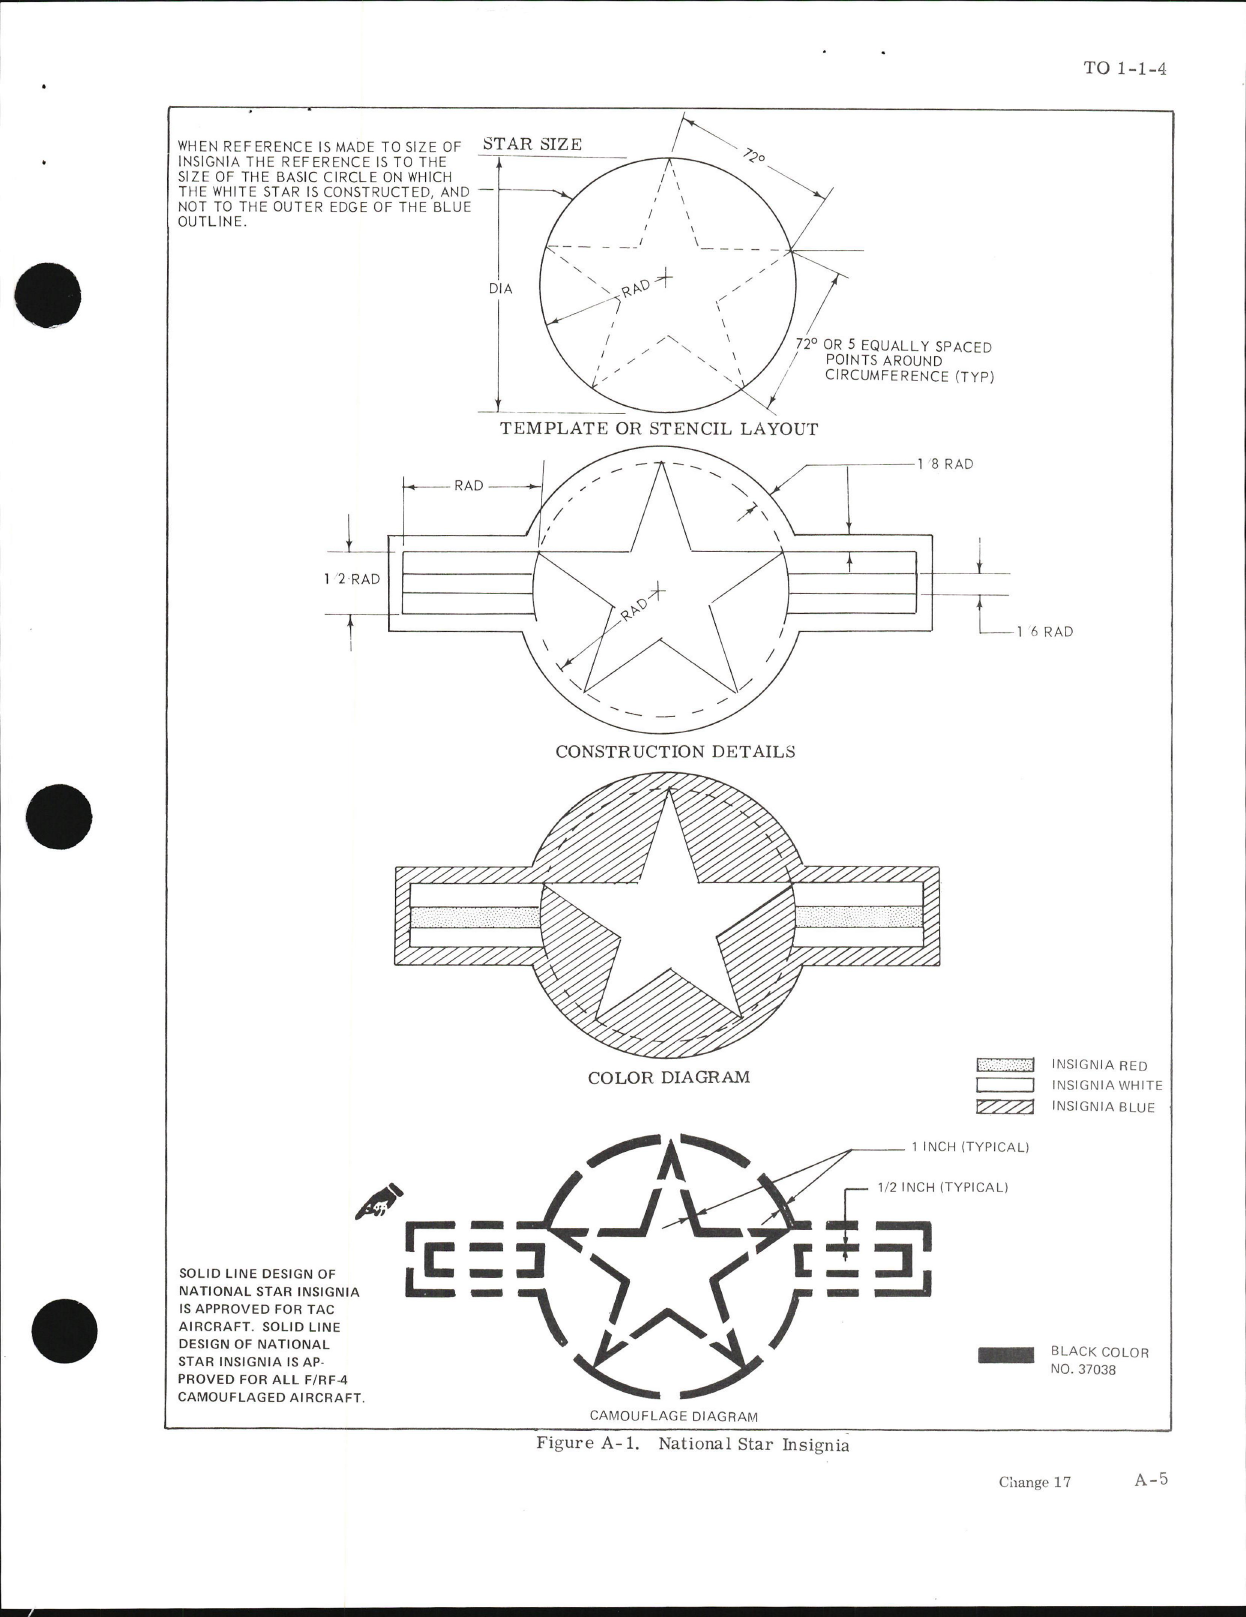 Sample page 7 from AirCorps Library document: Exterior Finishes, Insignia and Markings for USAF Aircraft - Change - 17